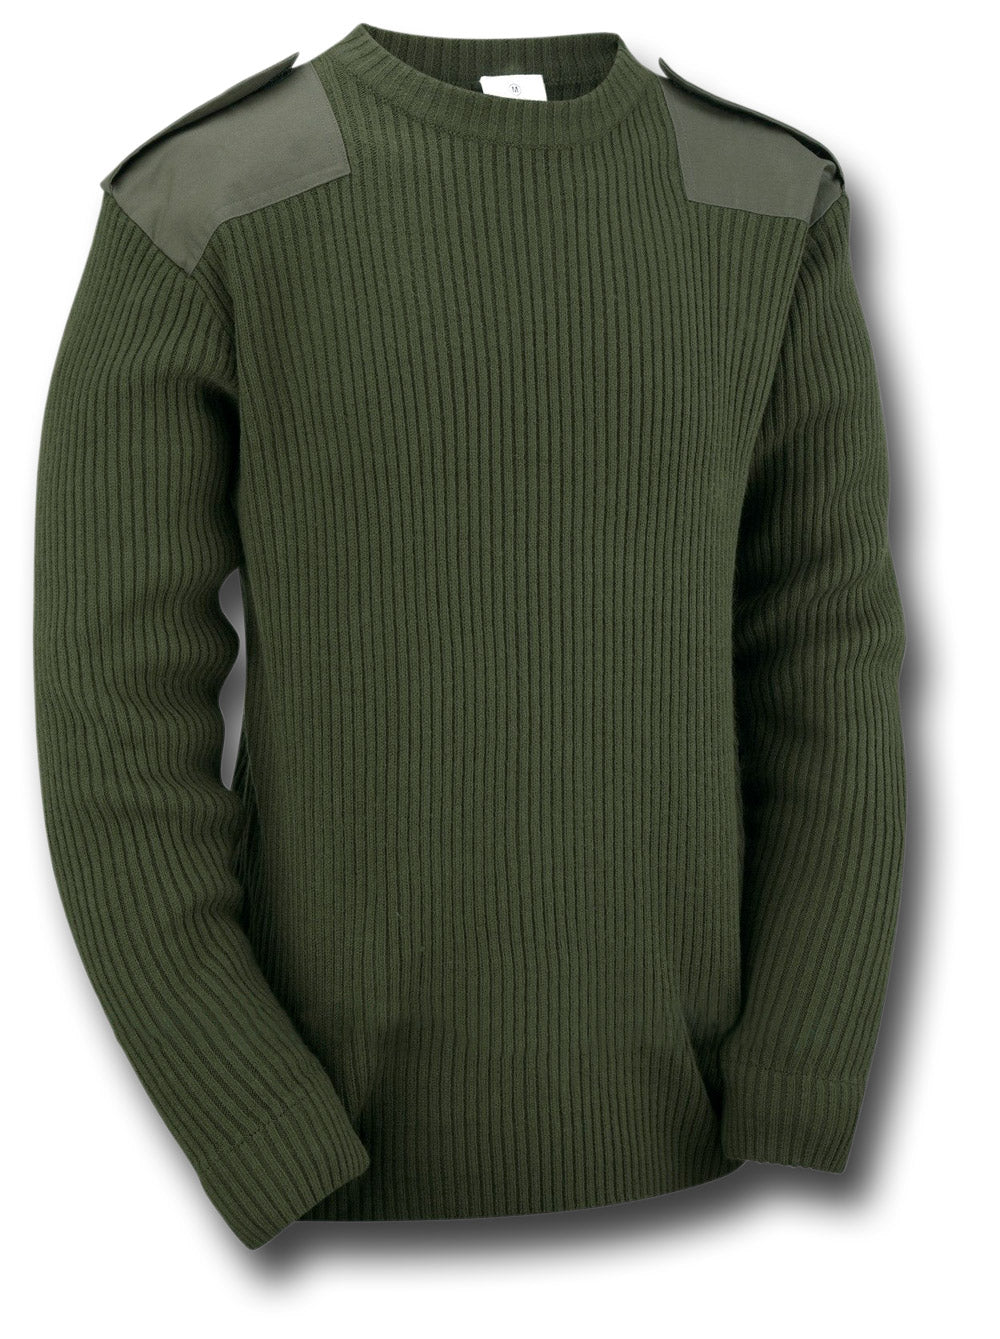 MILITARY STYLE CREW NECK SWEATER - GREEN